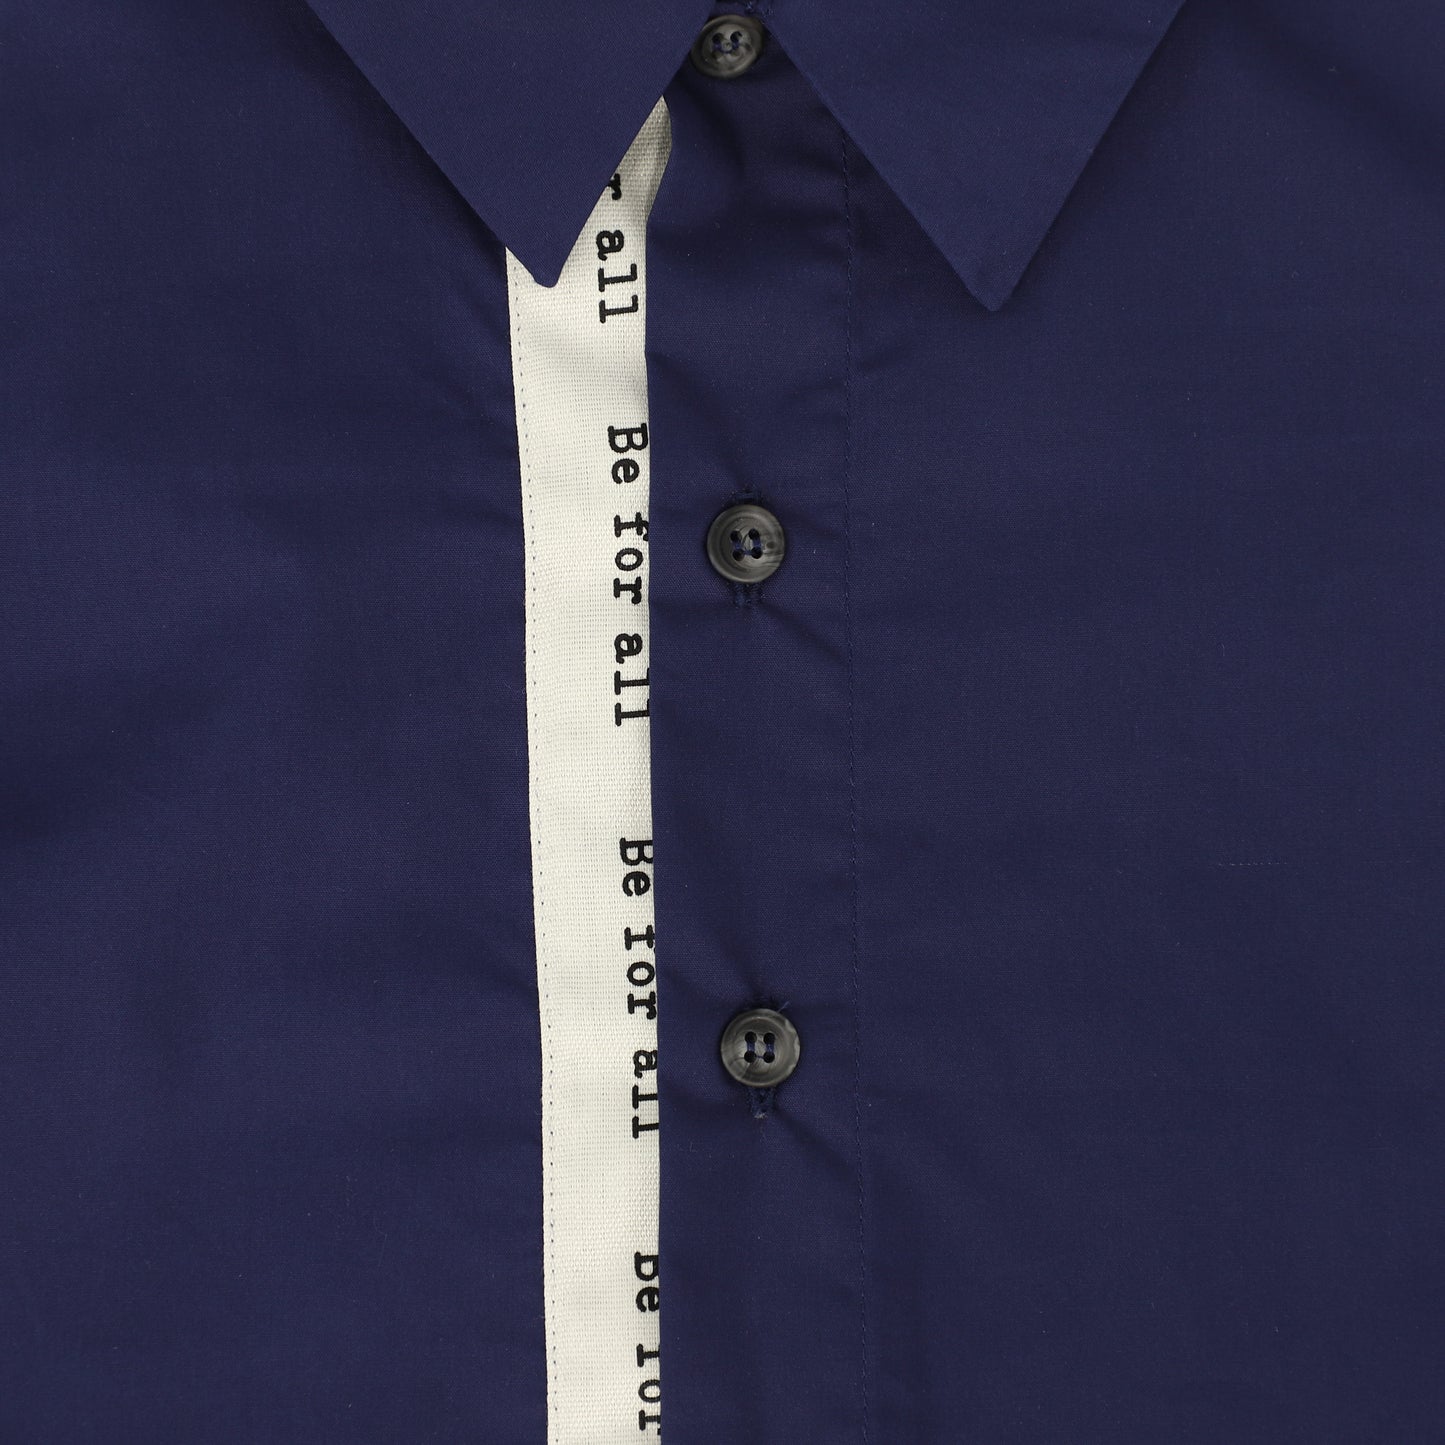 BE FOR ALL NAVY COLLAR SHIRT